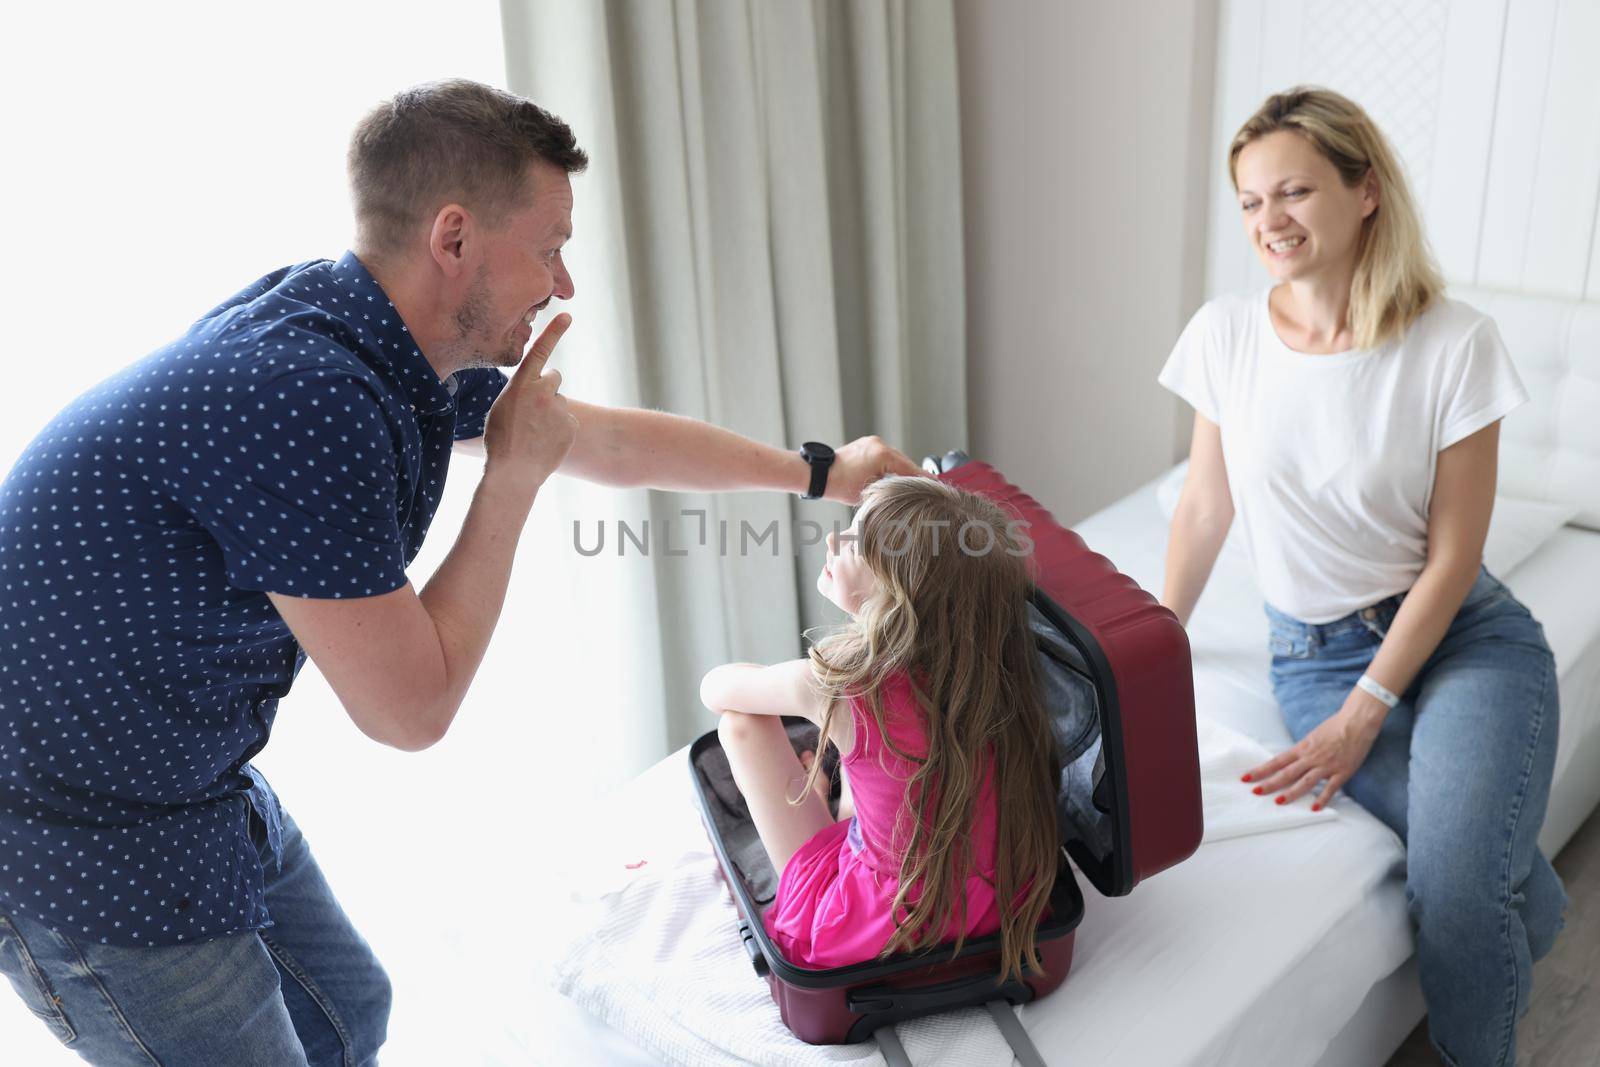 Cheerful dad and mom play hide and seek with child and suitcase. Dad asks child to sit quietly in suitcase